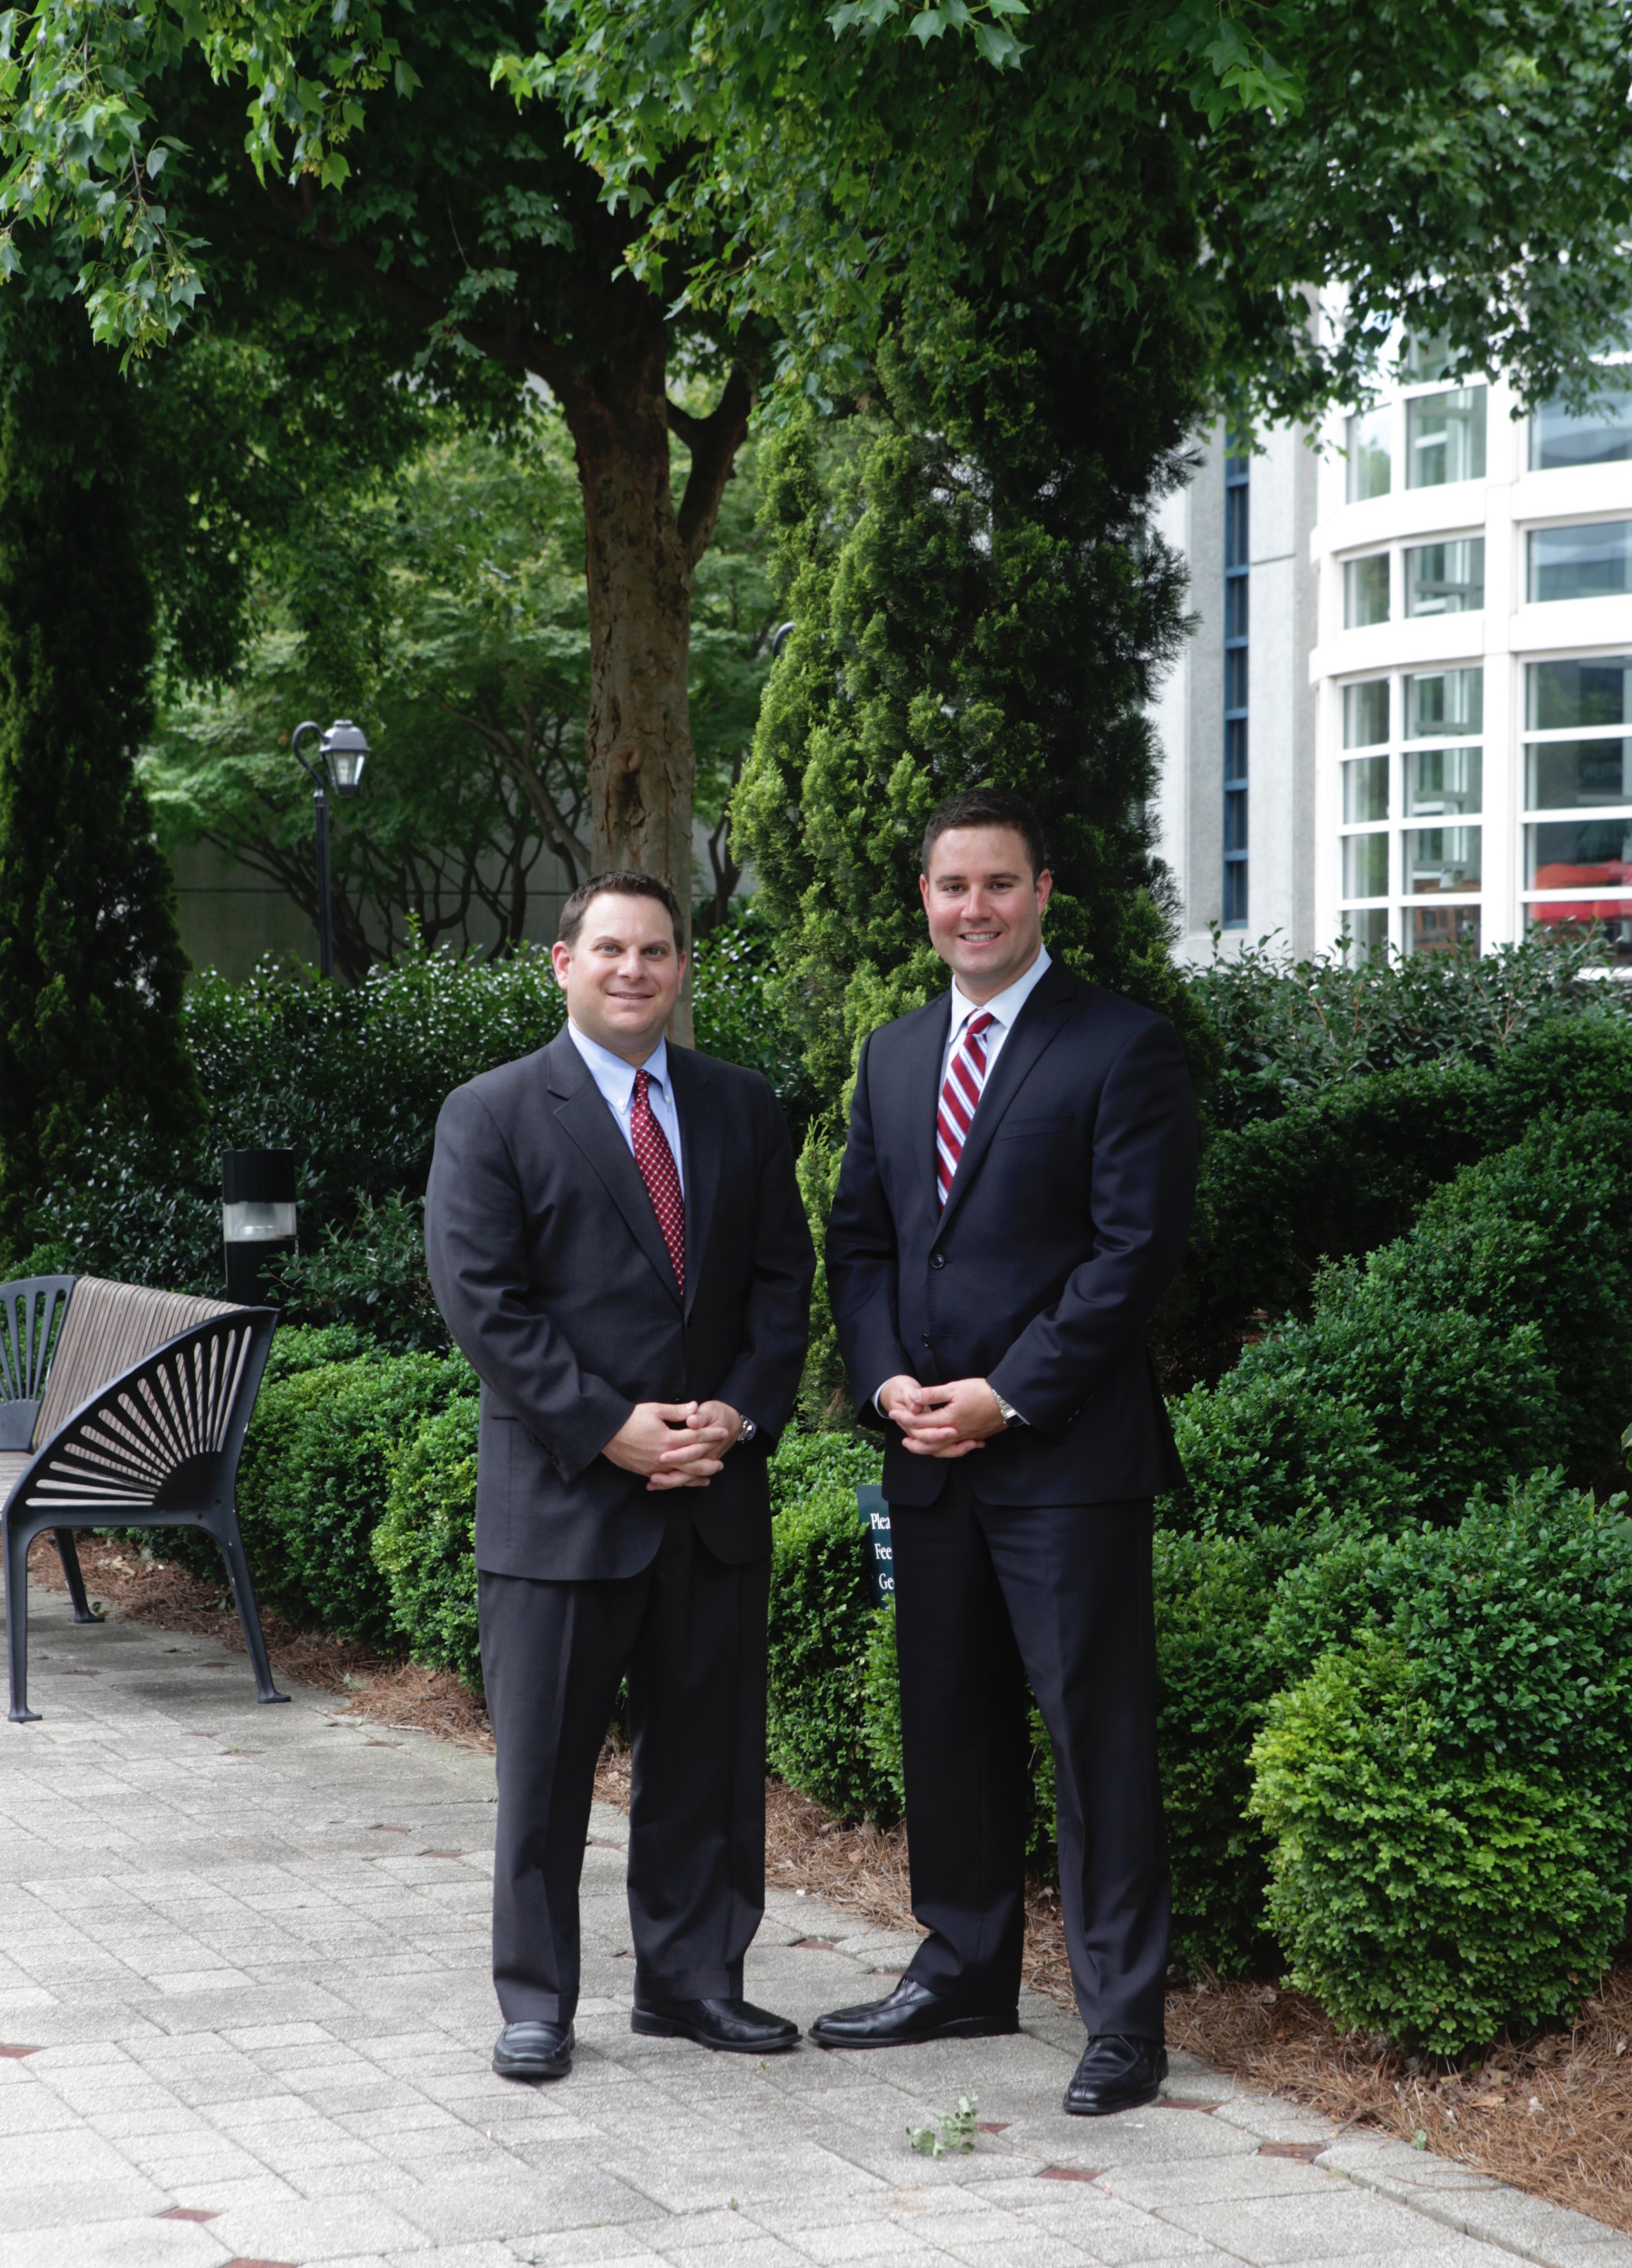 Todd Mitman and Jeremy Reese of Mitman, Reese and Associates